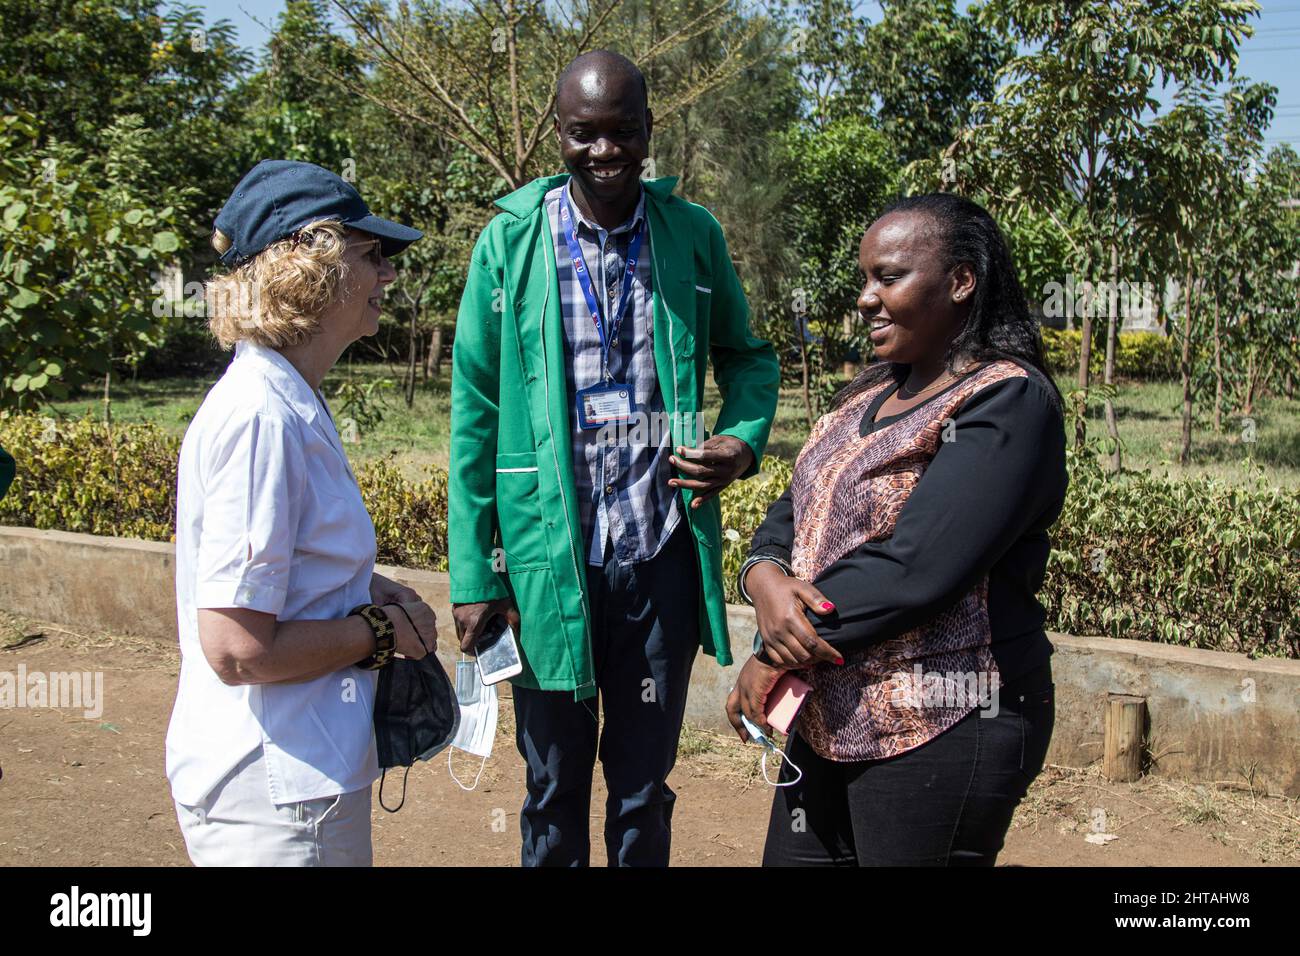 Inger Andersen (L), Executive Director of the United Nations Environment Programme(UNEP) talks with Maureen Njeri Nairobi Metropolitan Service Director of Environment, Water and Sanitation Services Ibrahim Otieno (C) listens during a field trip to Dandora Dumping site ahead of the Fifth Session of the United Nations Environment Assembly (UNEA-5).Discussions to chart a way forward for a global plastic treaty to address the growing problem of plastic pollution are set to begin this week during the United Nations Environmental Assembly UNEA 5.2). With two draft resolutions on the table, member c Stock Photo